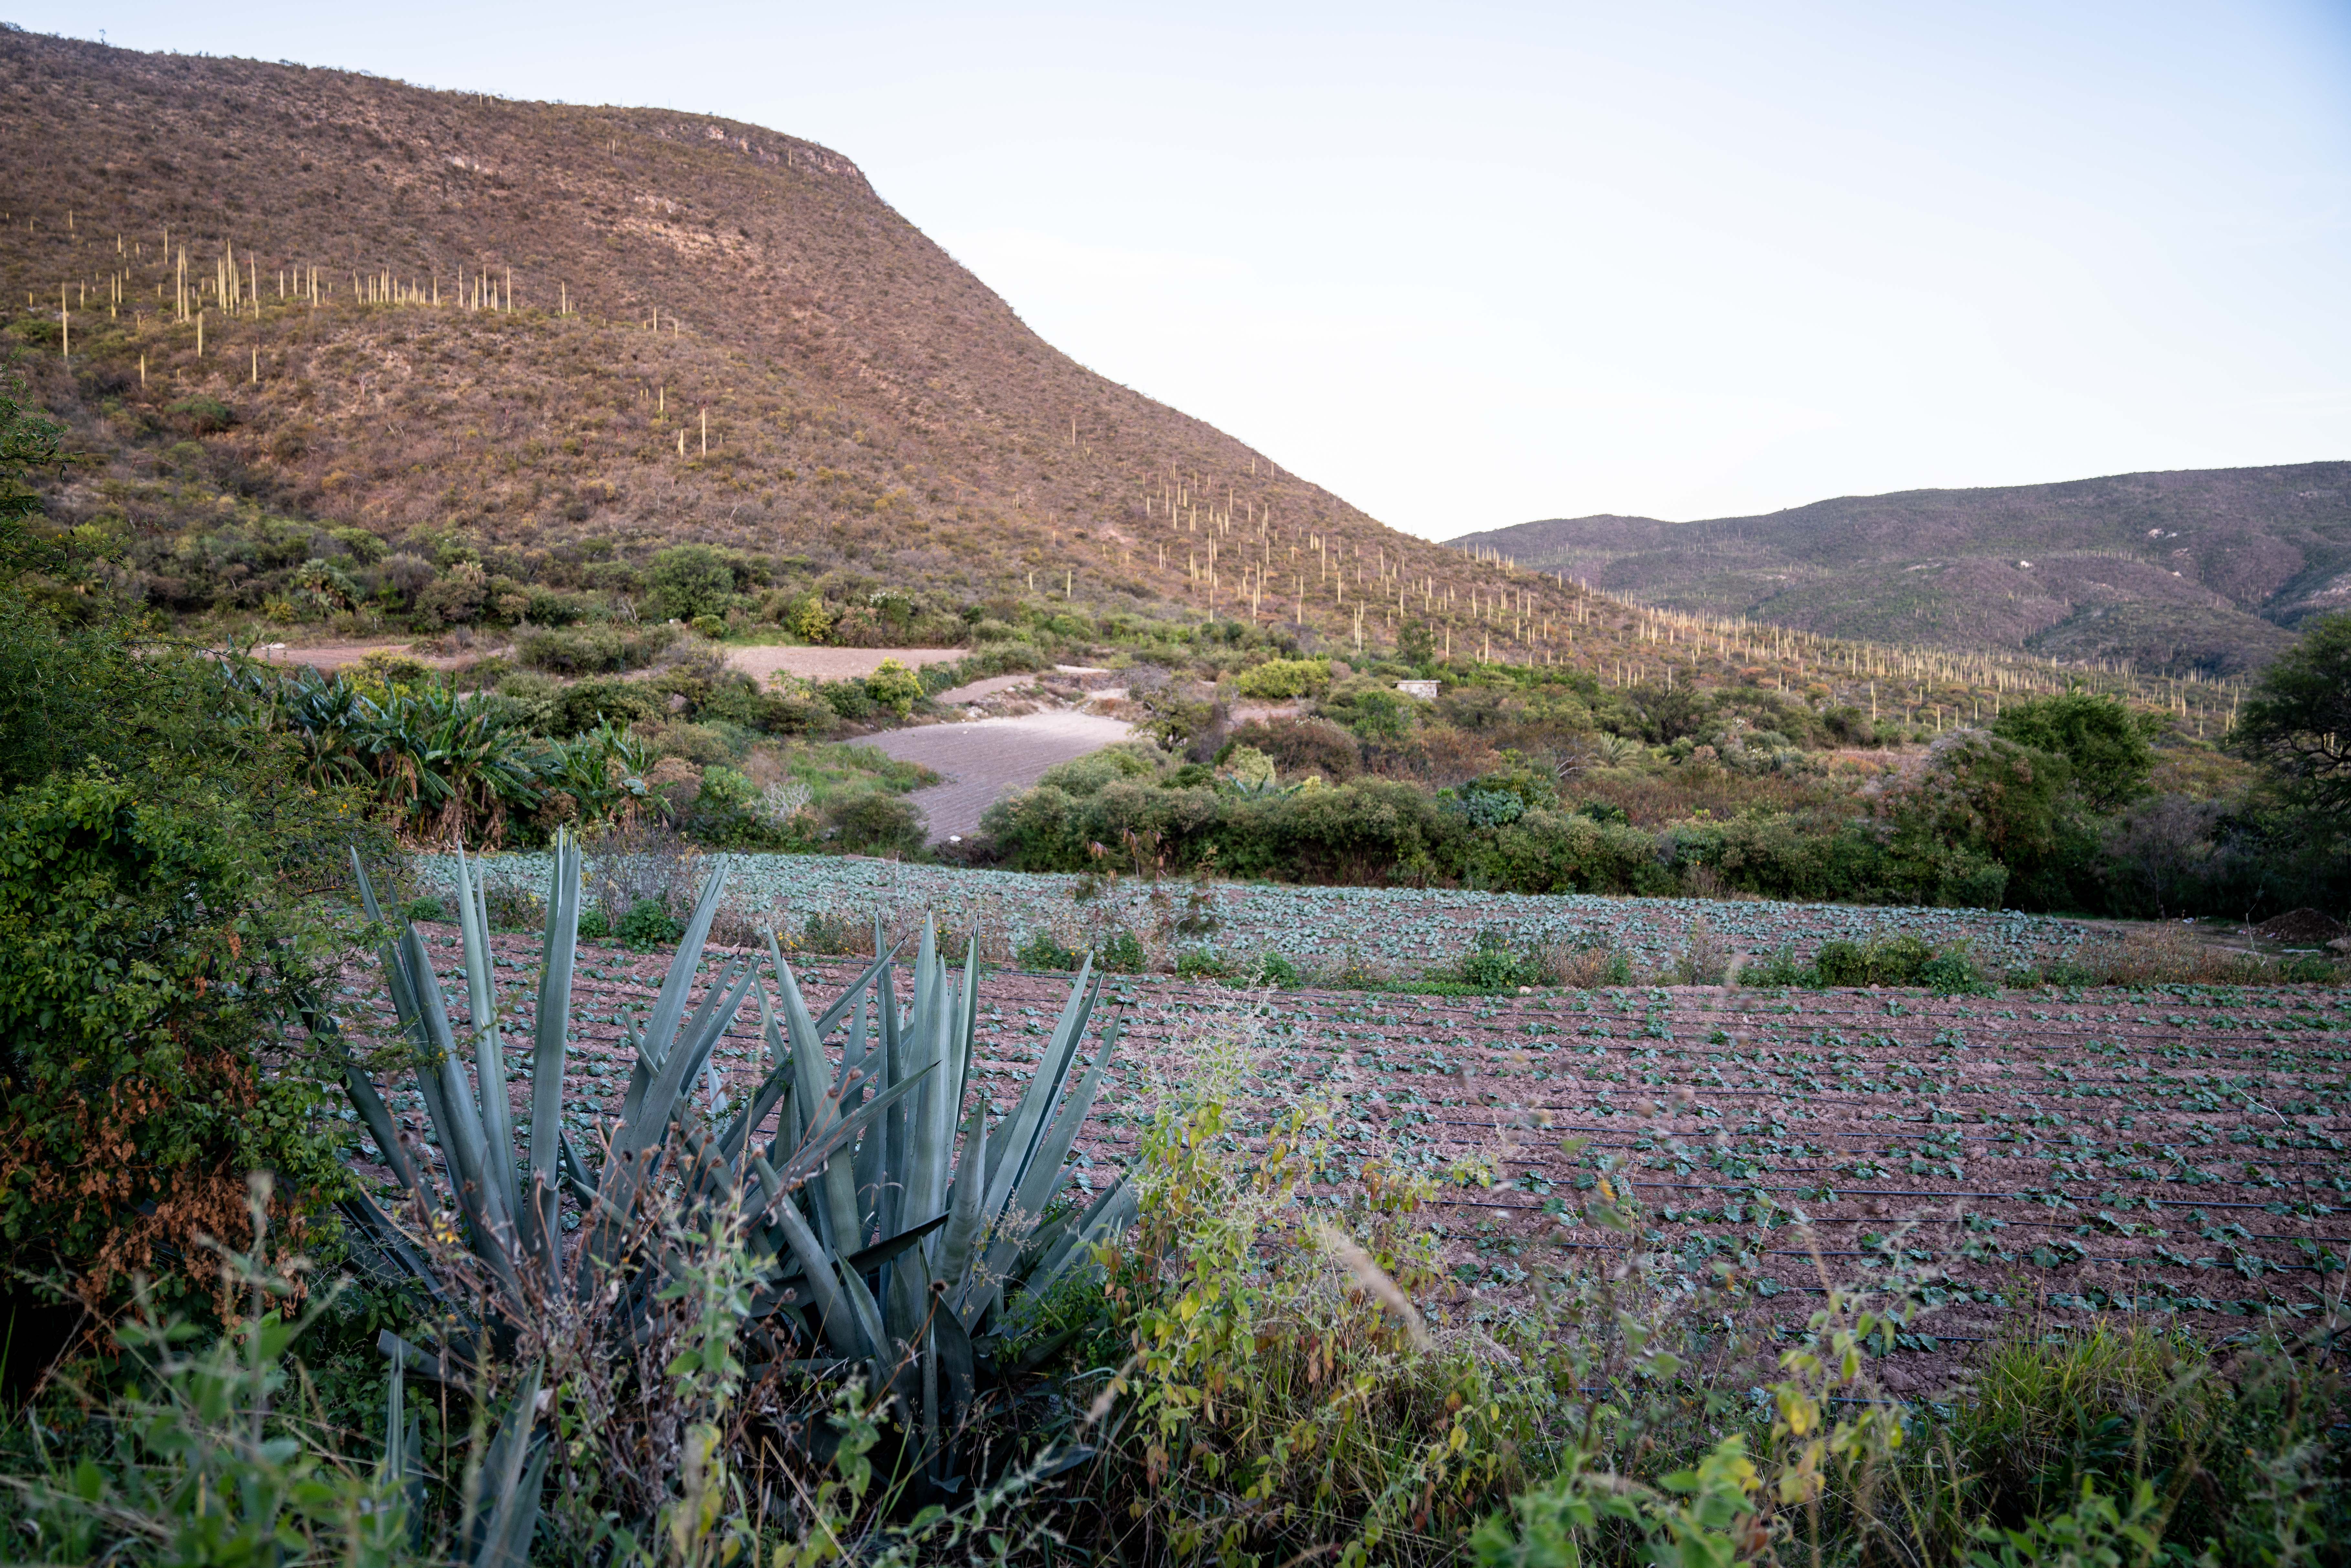 Del Maguey produce a range of mezcals from many small villages in Oaxaca